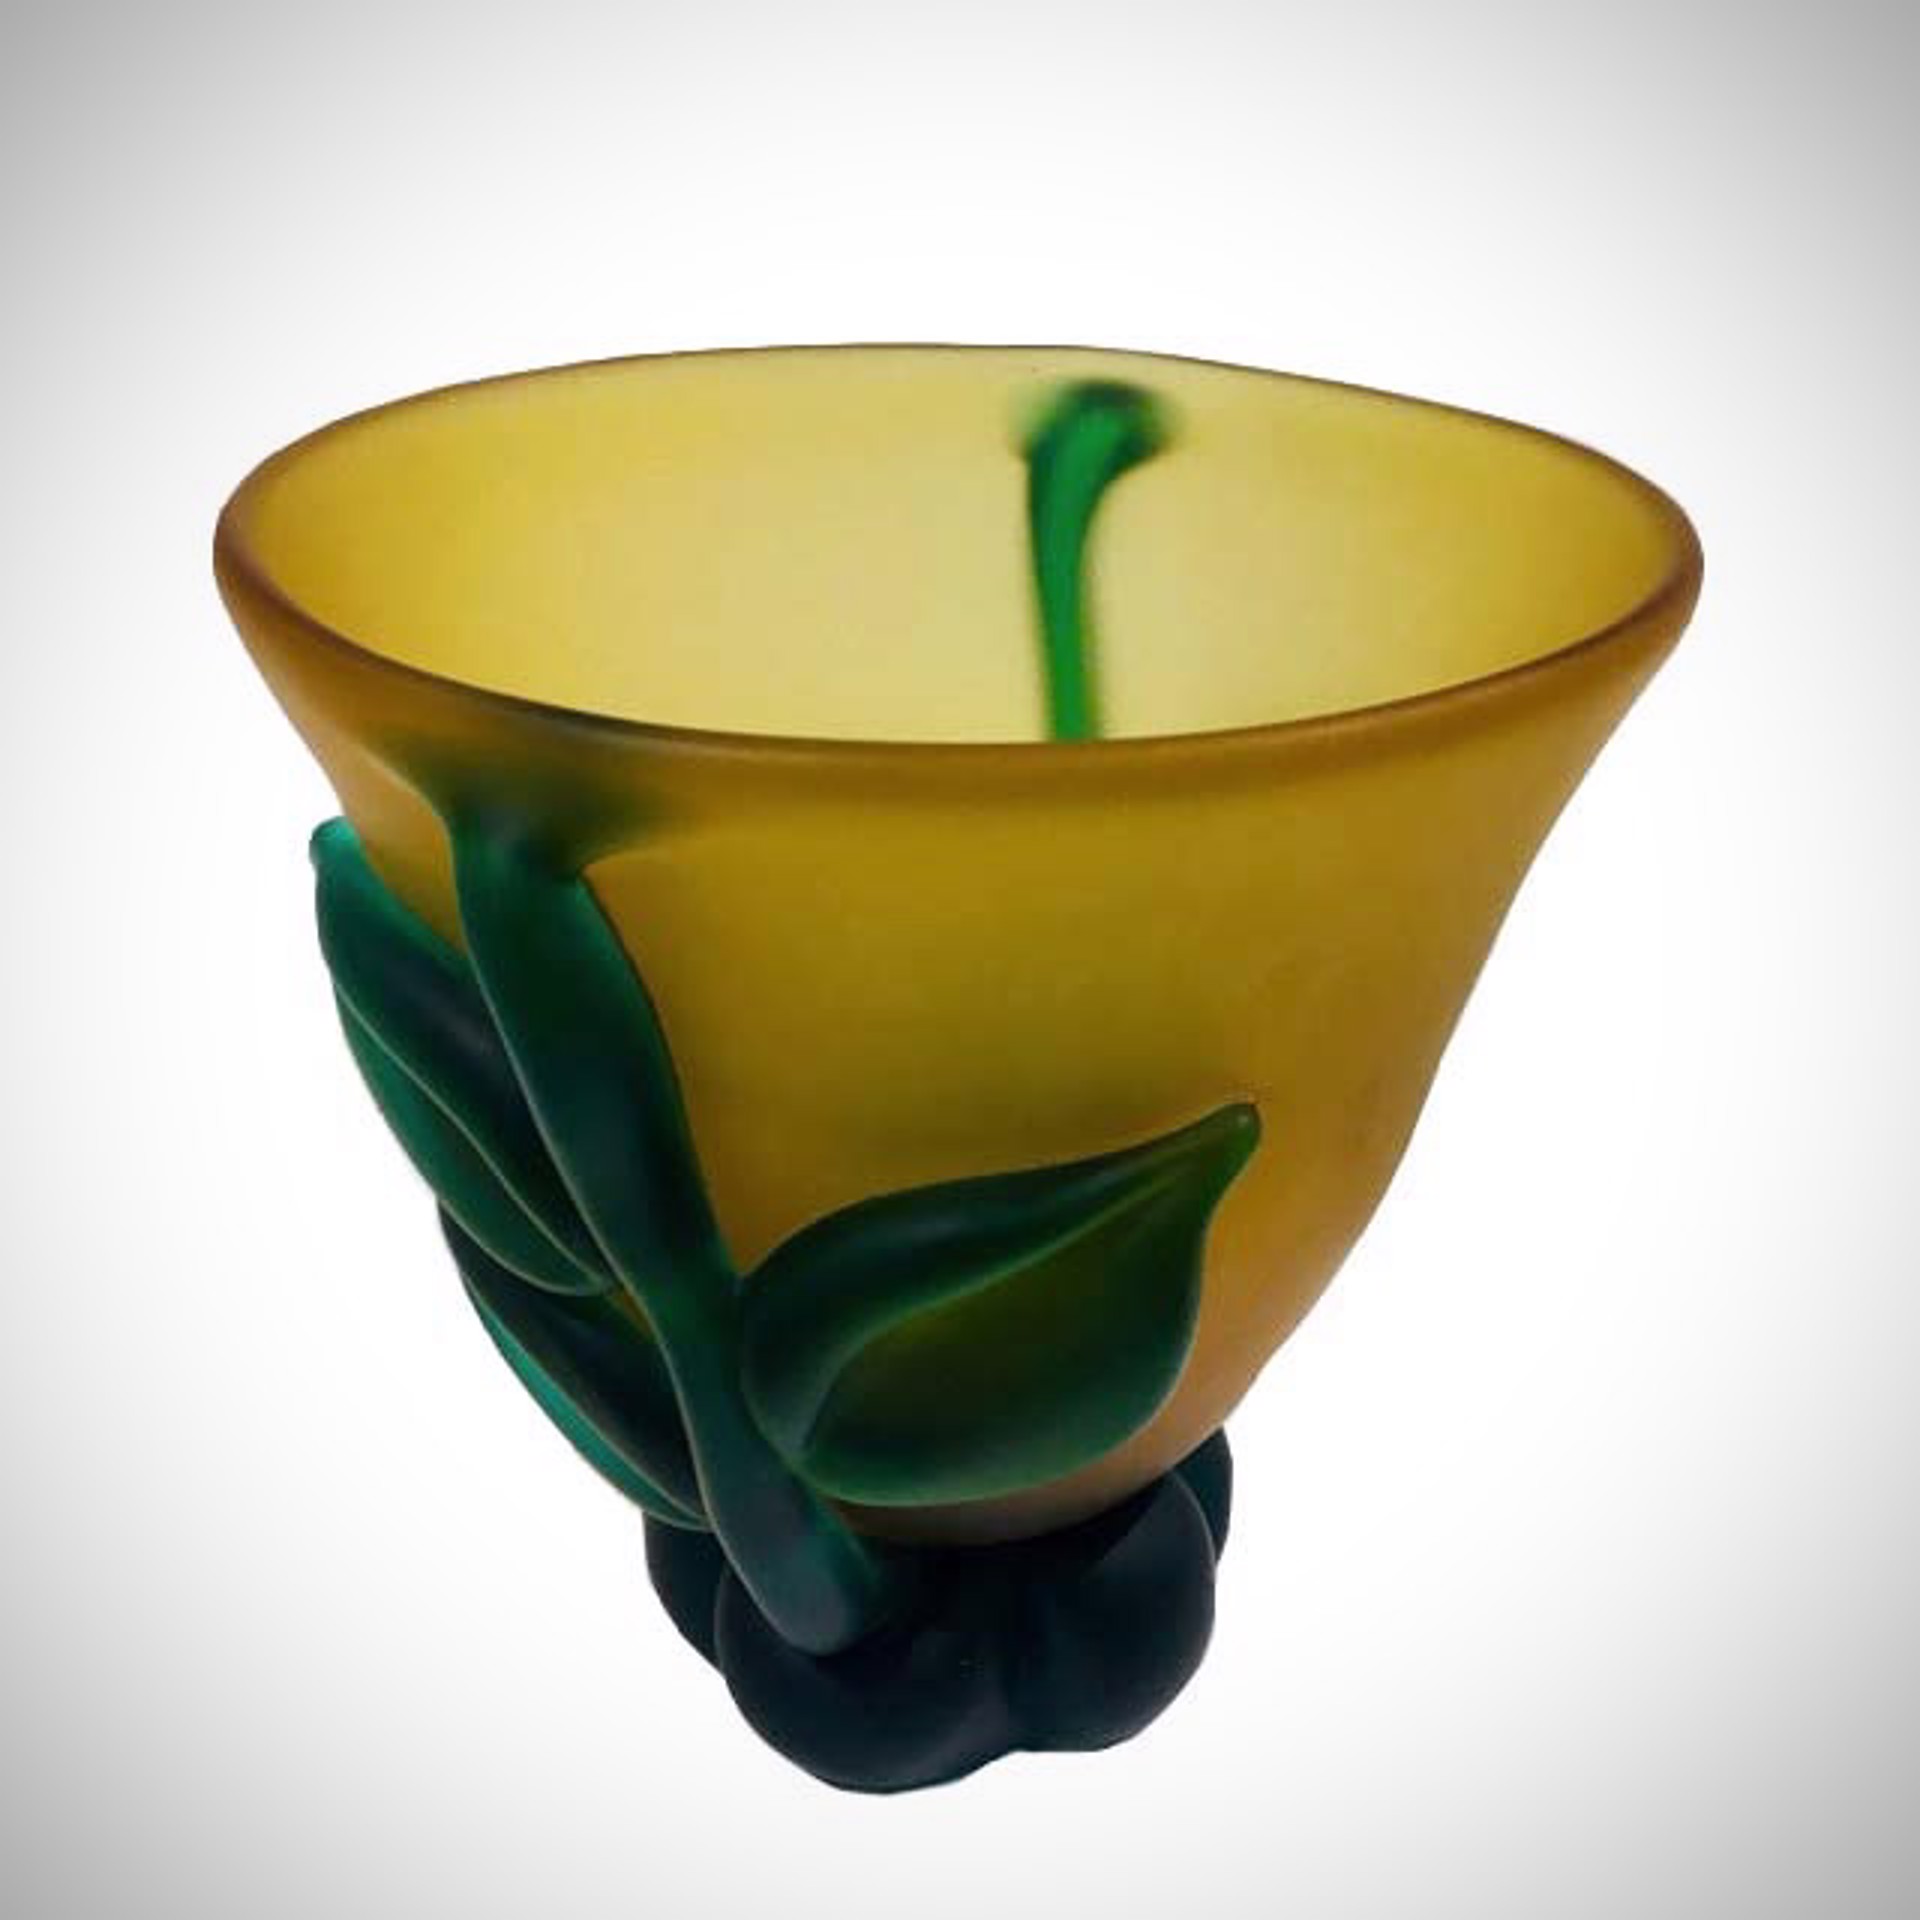 Short & Wide Amber/Green vase by TOMMIE RUSH